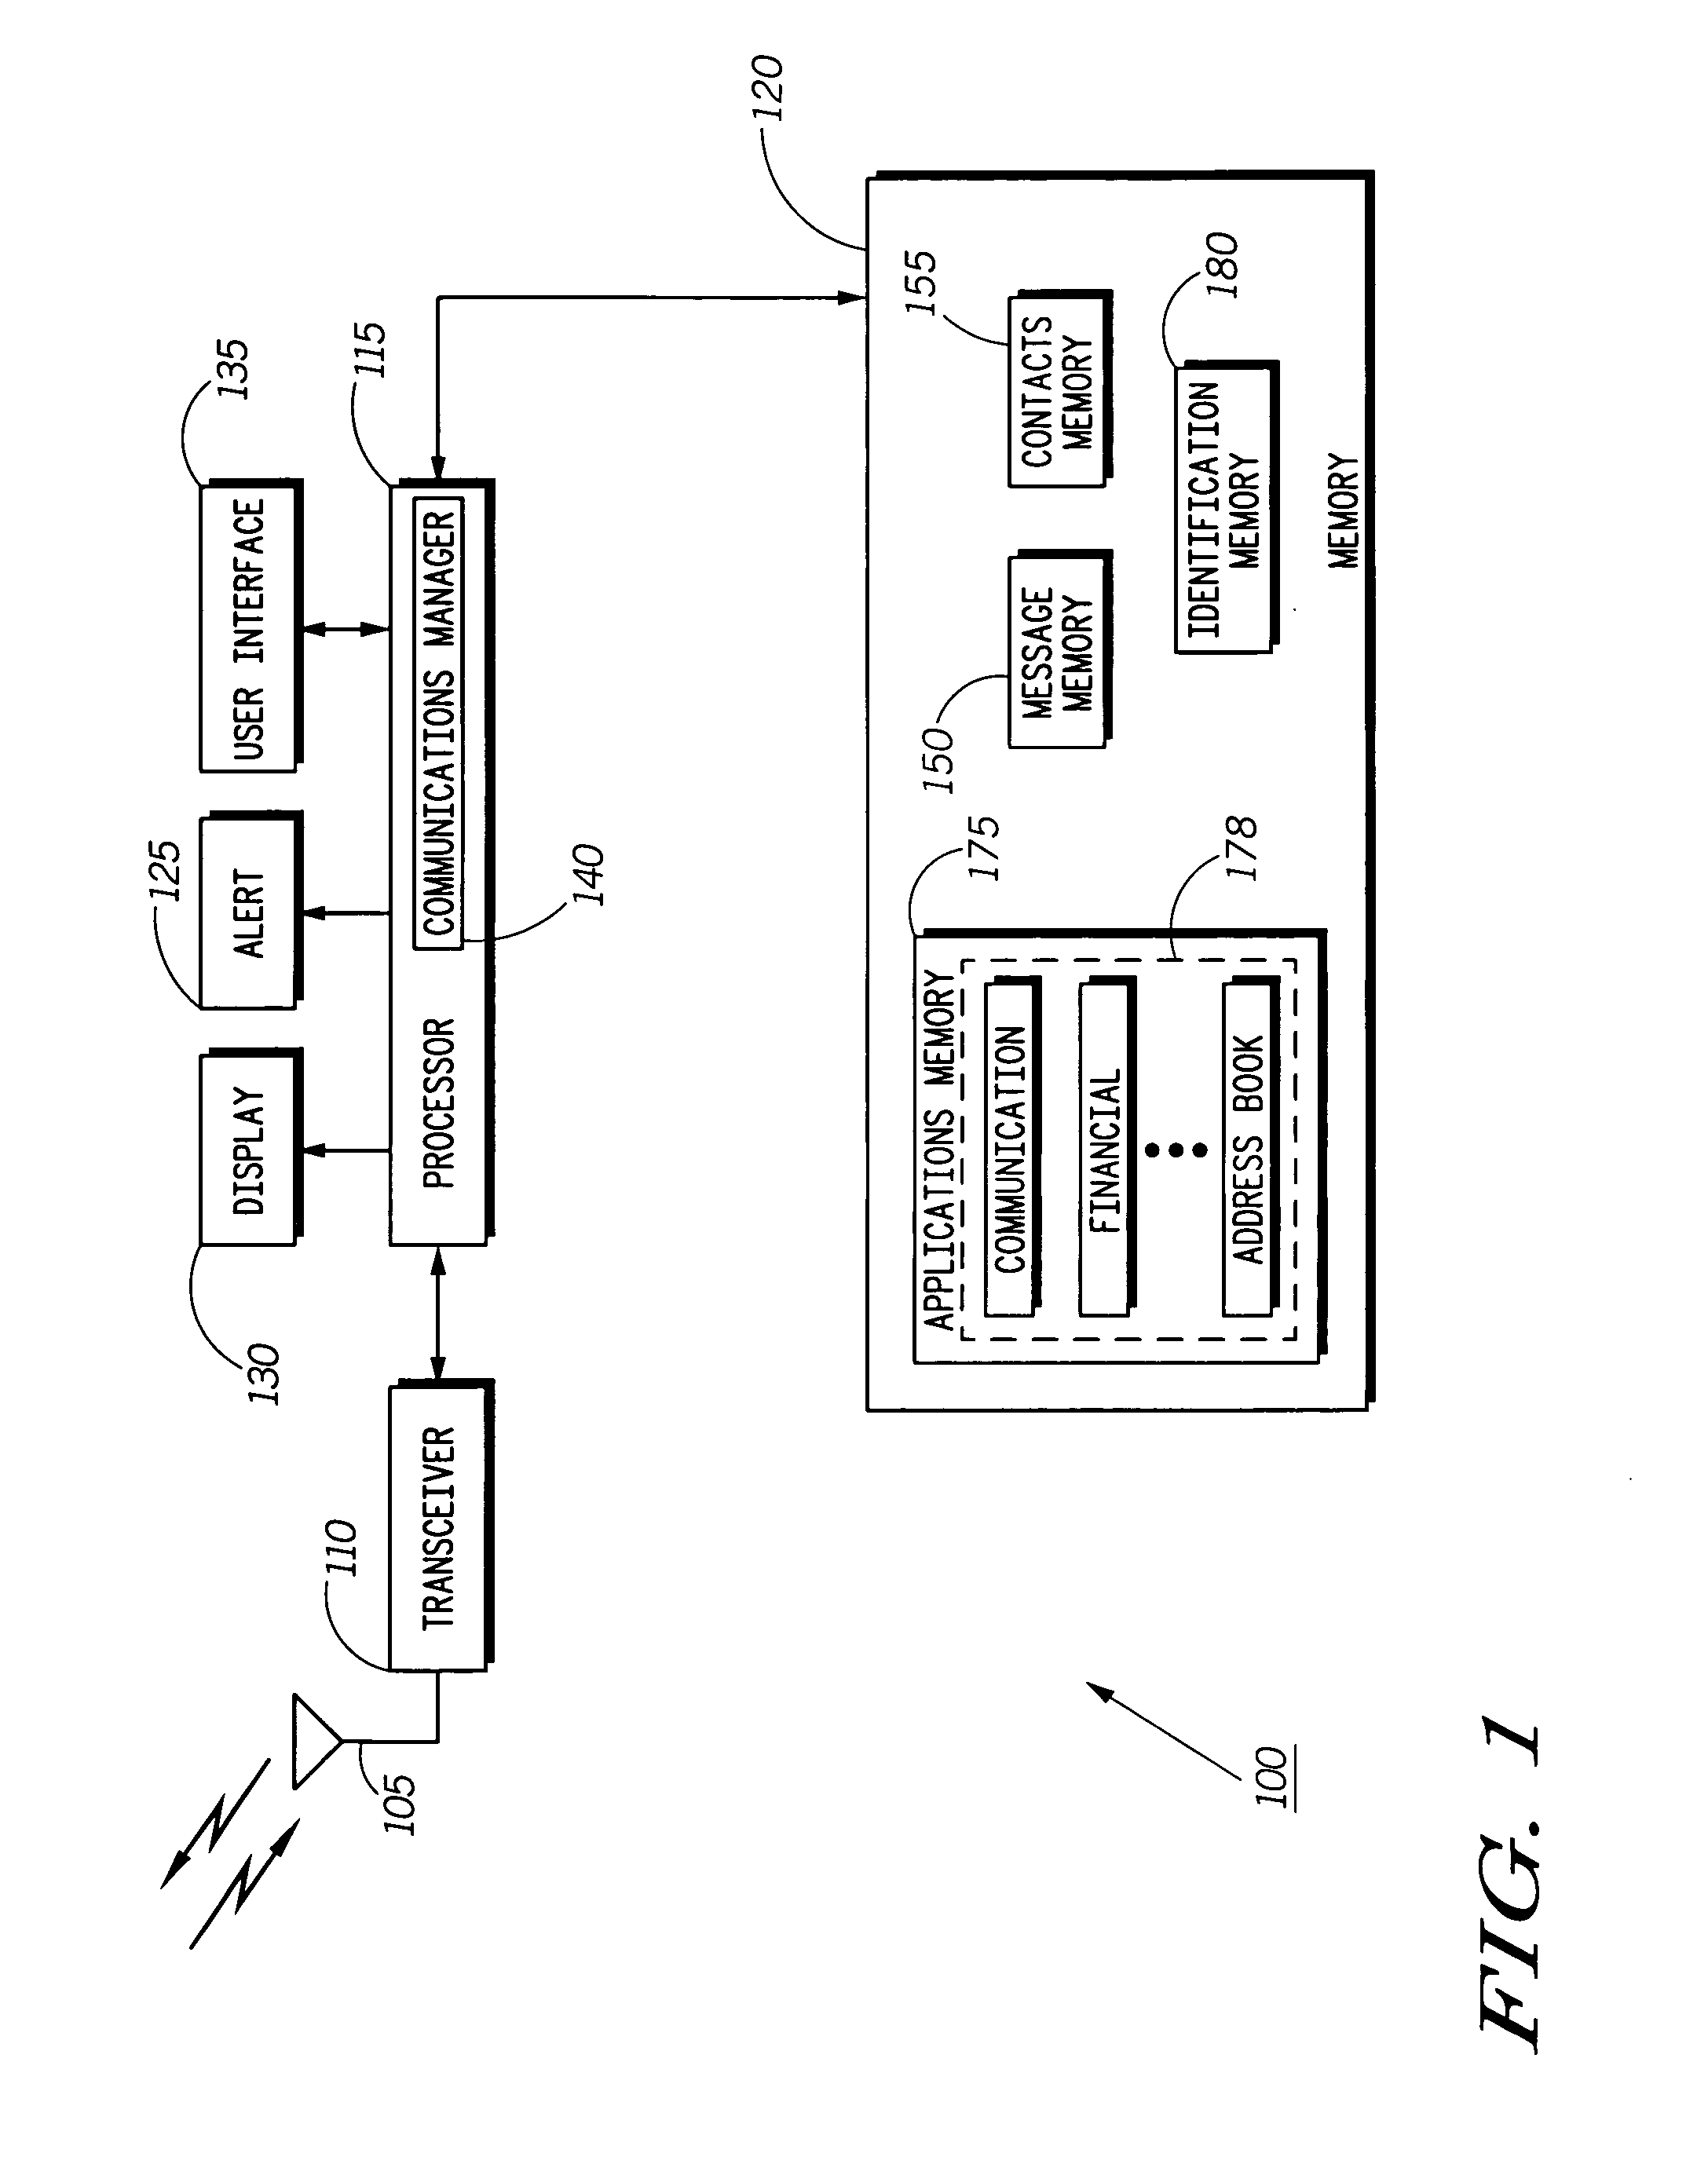 Communication device and method of operation therefor